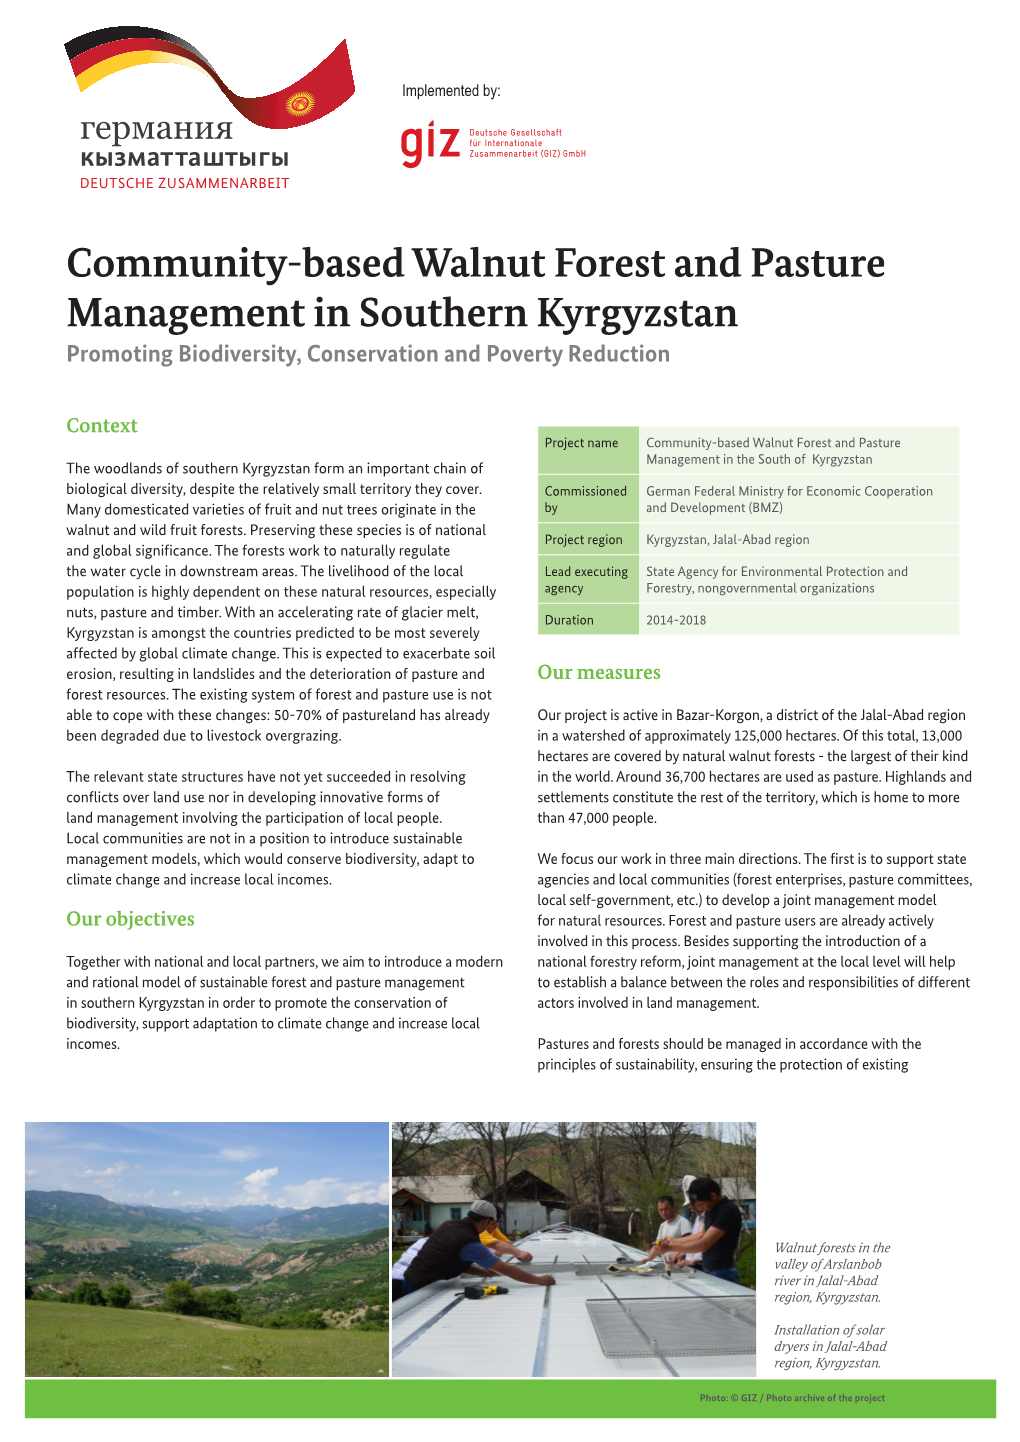 Community-Based Walnut Forest and Pasture Management in Southern Kyrgyzstan Promoting Biodiversity, Conservation and Poverty Reduction